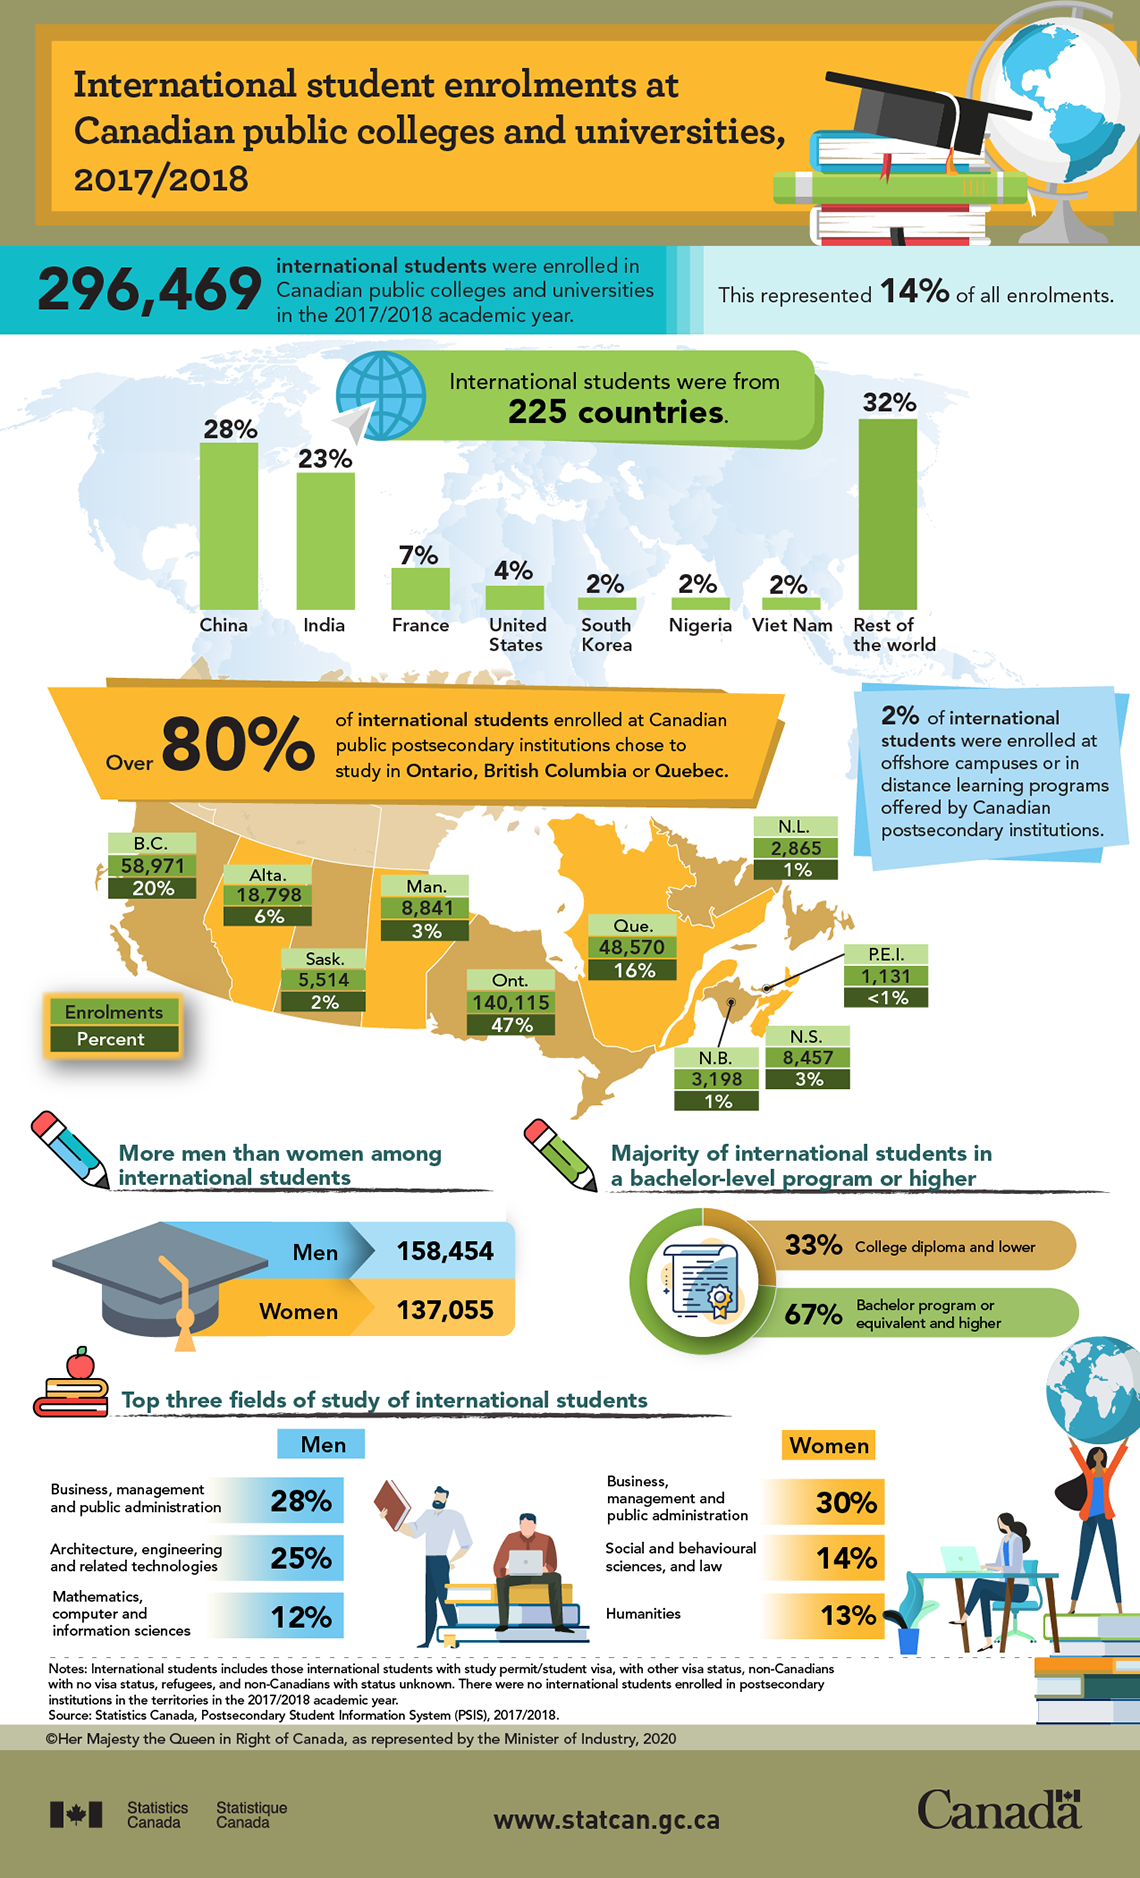 Infographic: International student enrolments at Canadian public colleges and universities, 2017/2018